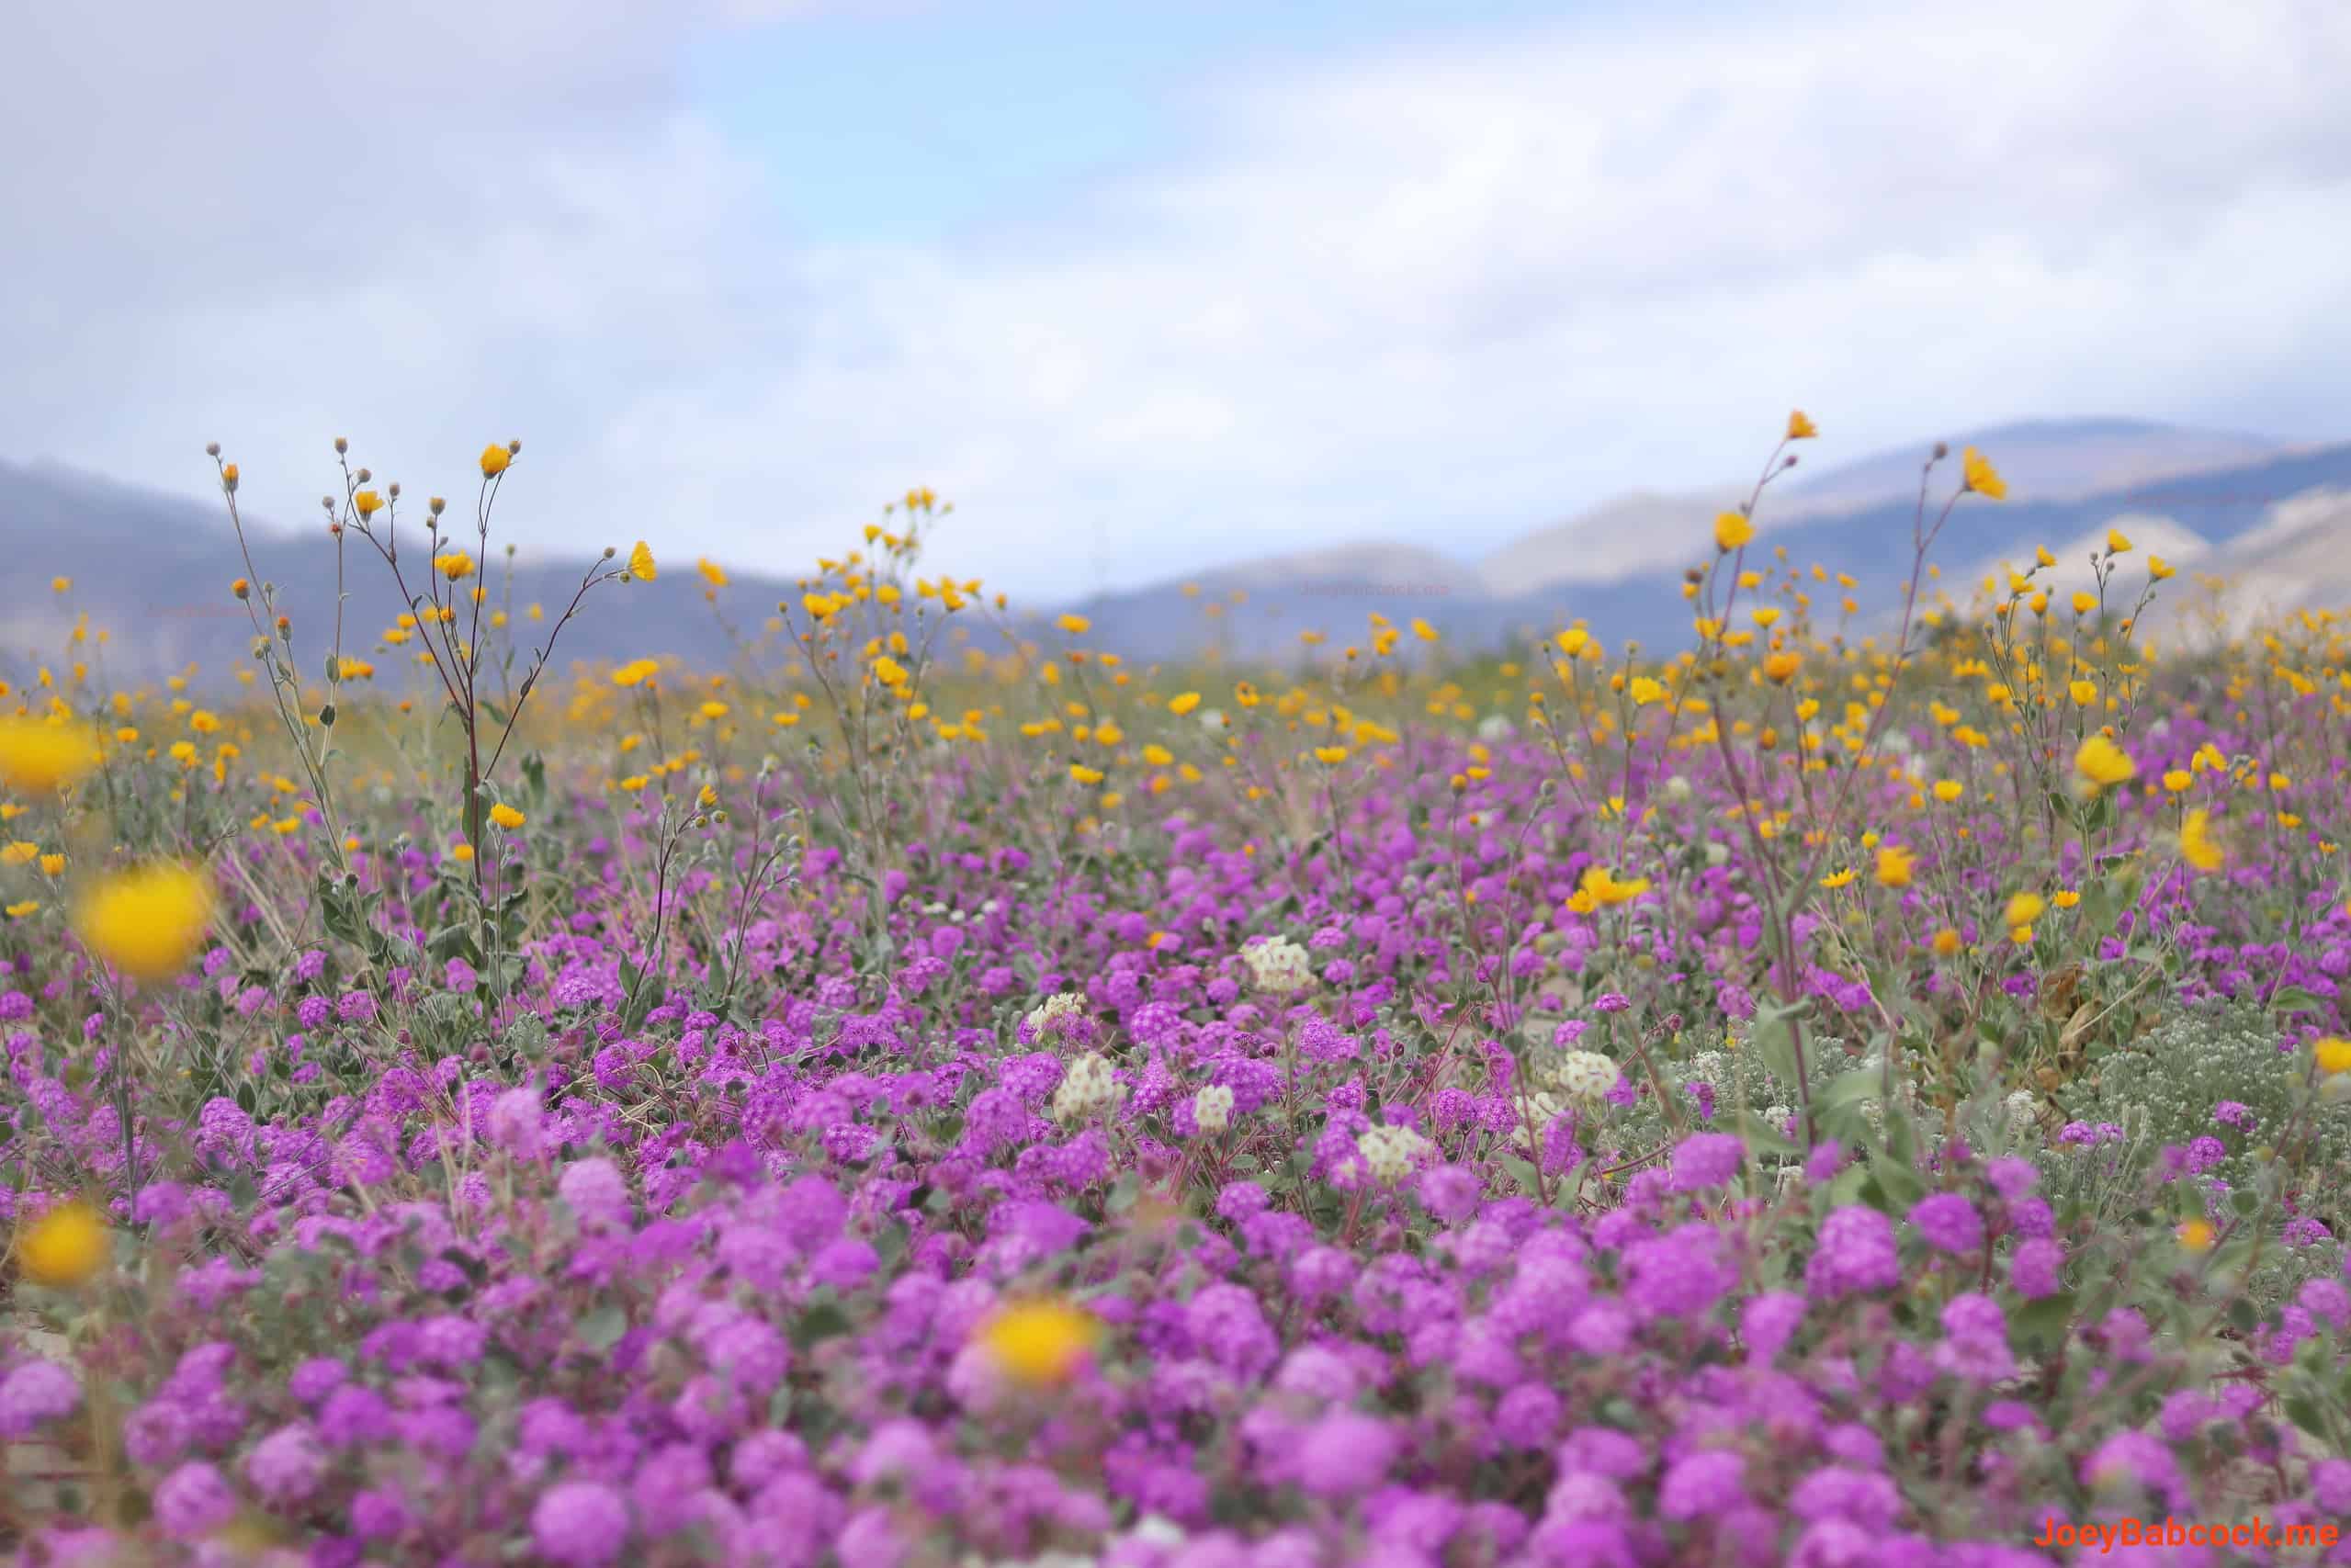 Desert sand verbena blankets the Borrego Springs landscape in shades of purple, punctuated by bursts of yellow from desert sunflowers. (c) Joey Babcock March, 2024 - Borrego Springs, CA